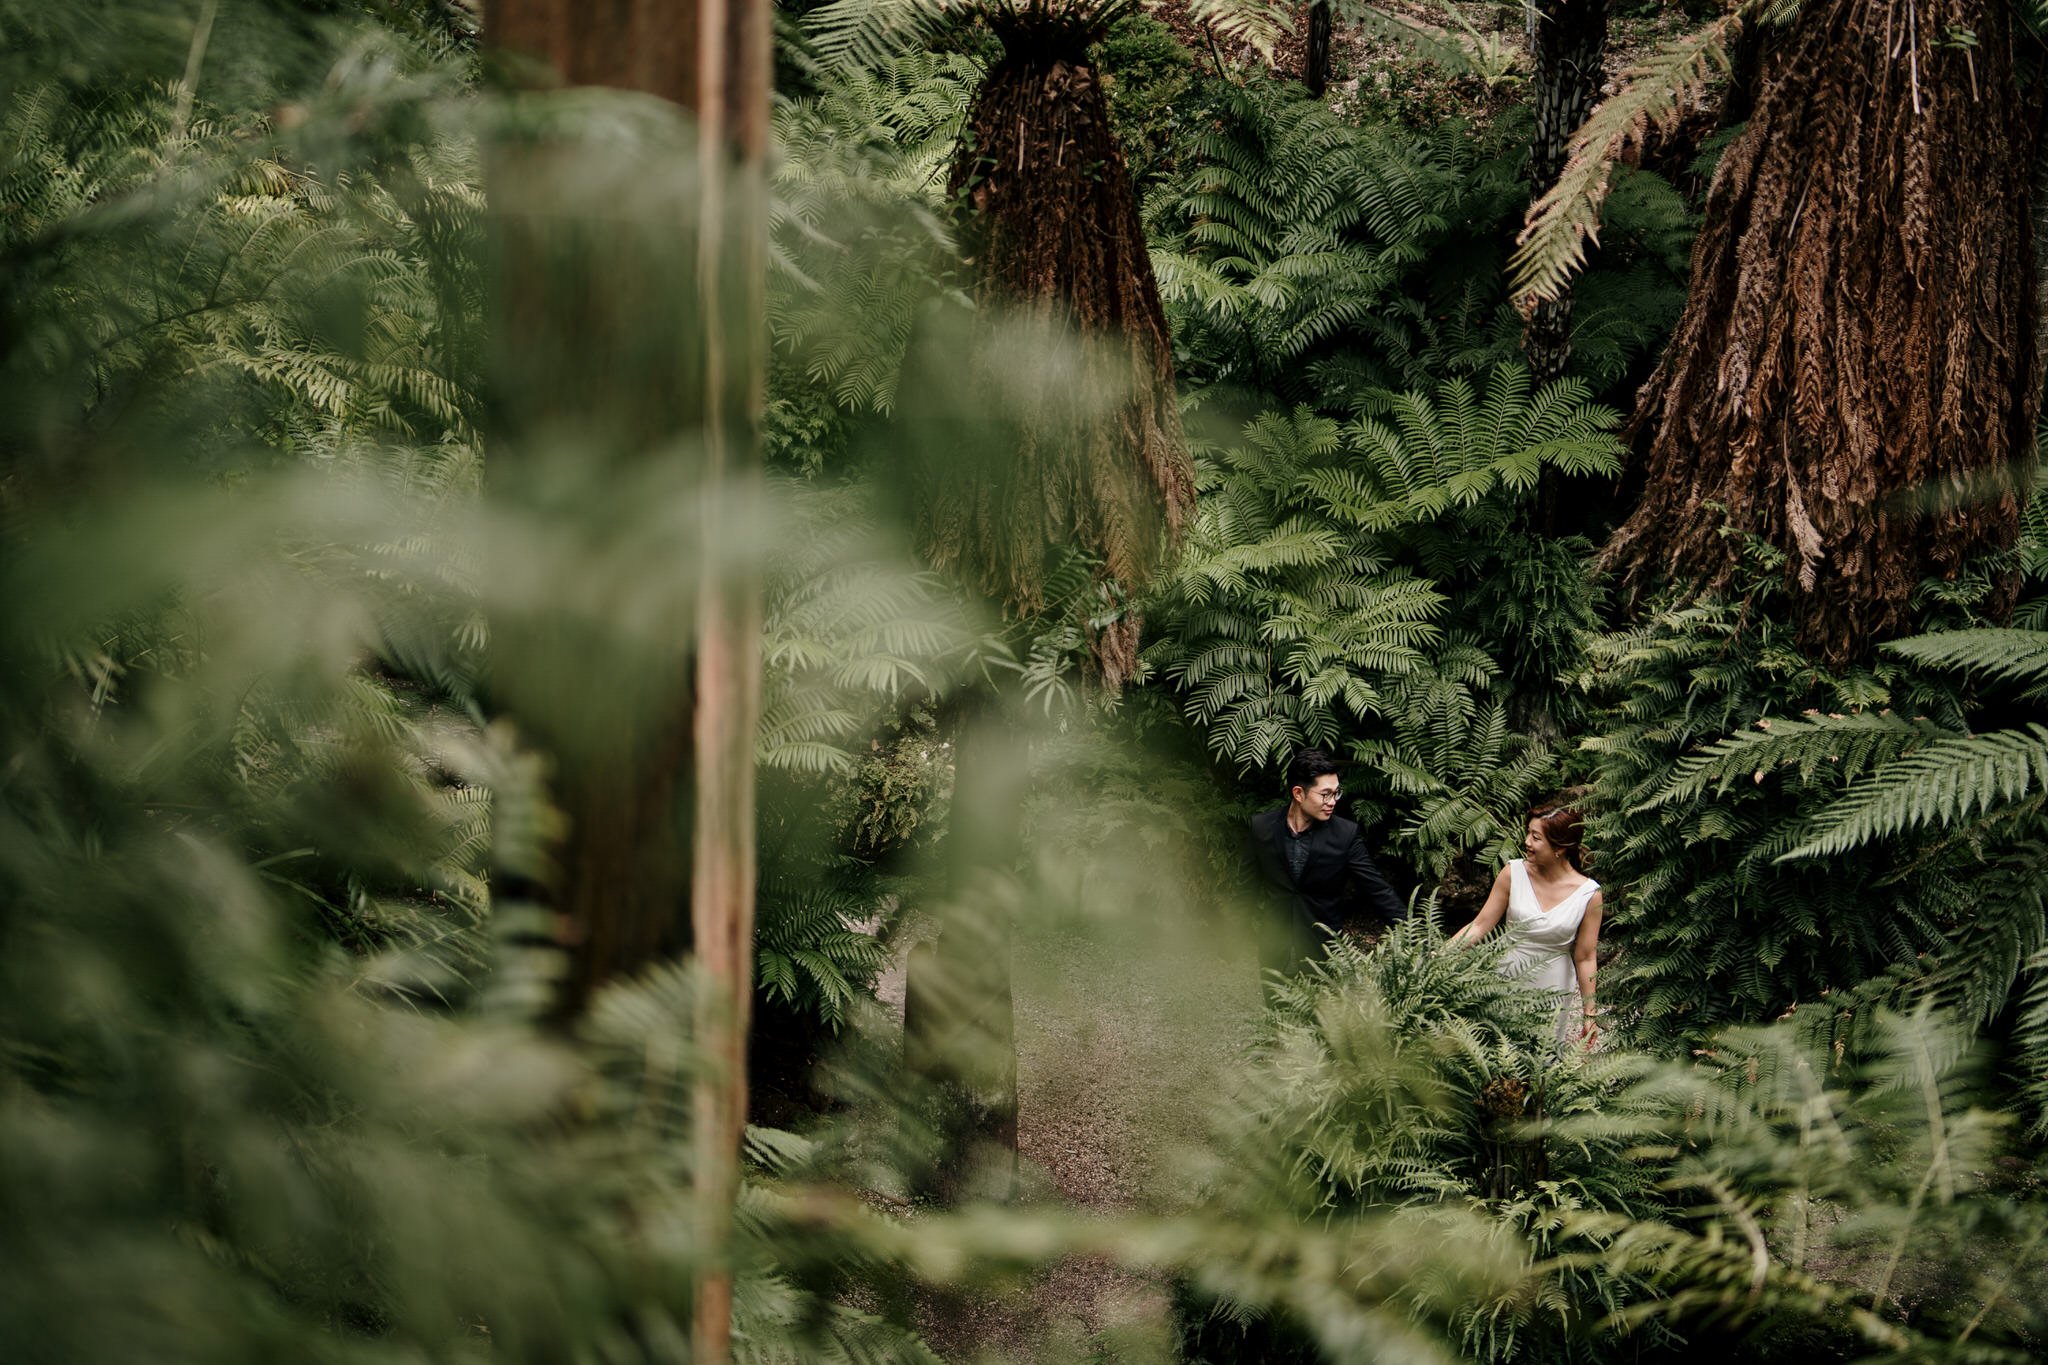 auckland-wedding-photographer-videographer-story-by-koo-koo's-jewelry-dear-white-productions-pre-wedding-engagement-photo-glass-house-botanic-fernery-garden (29).JPG